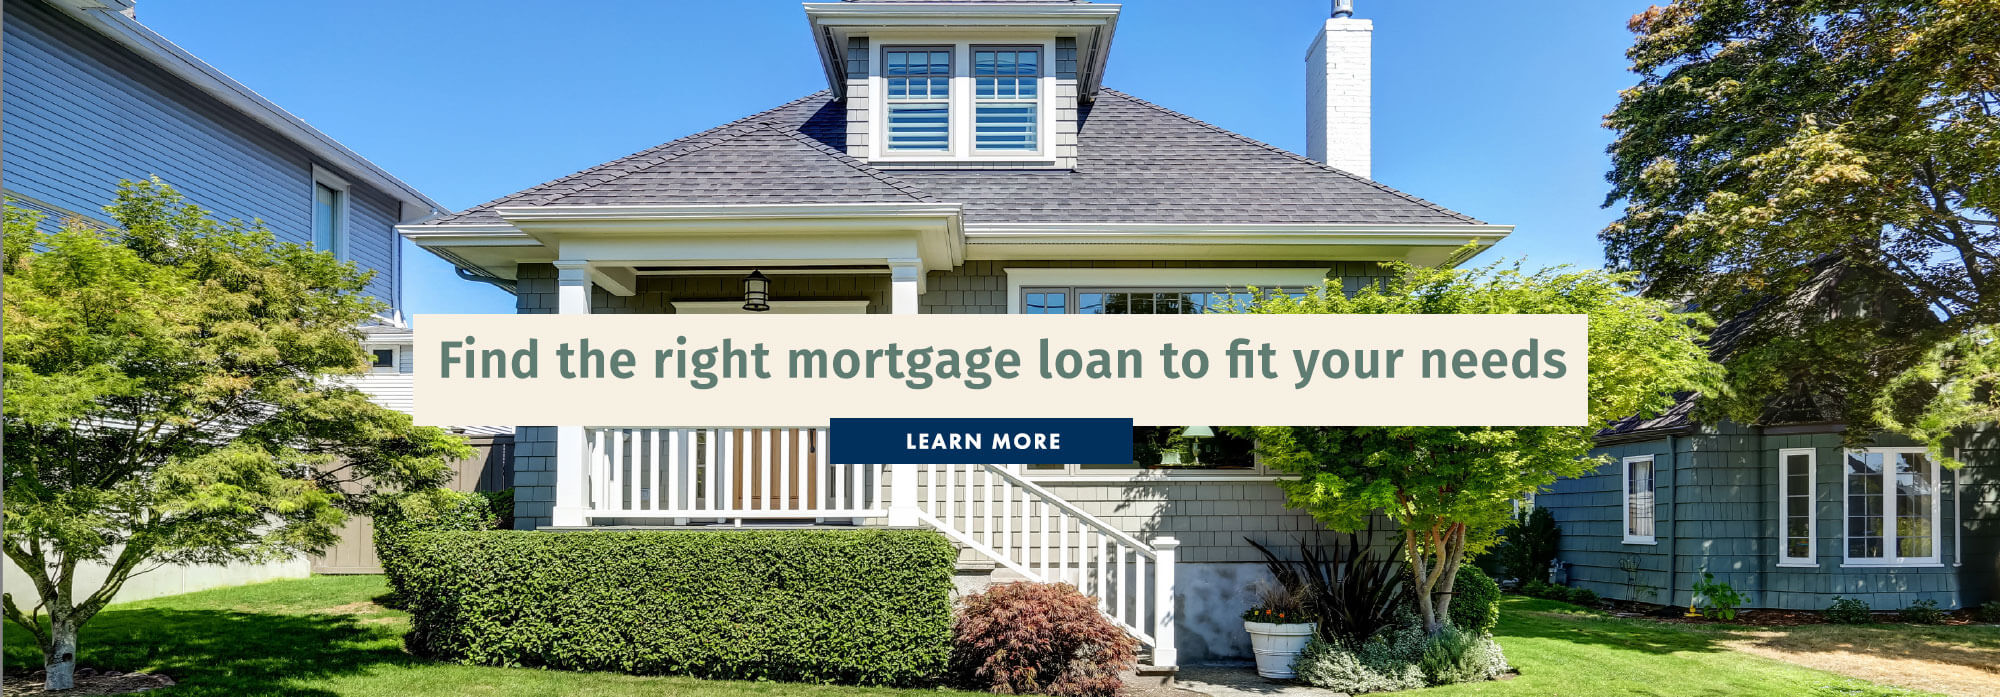 Find the right mortgage loan to fit your needs. Learn More